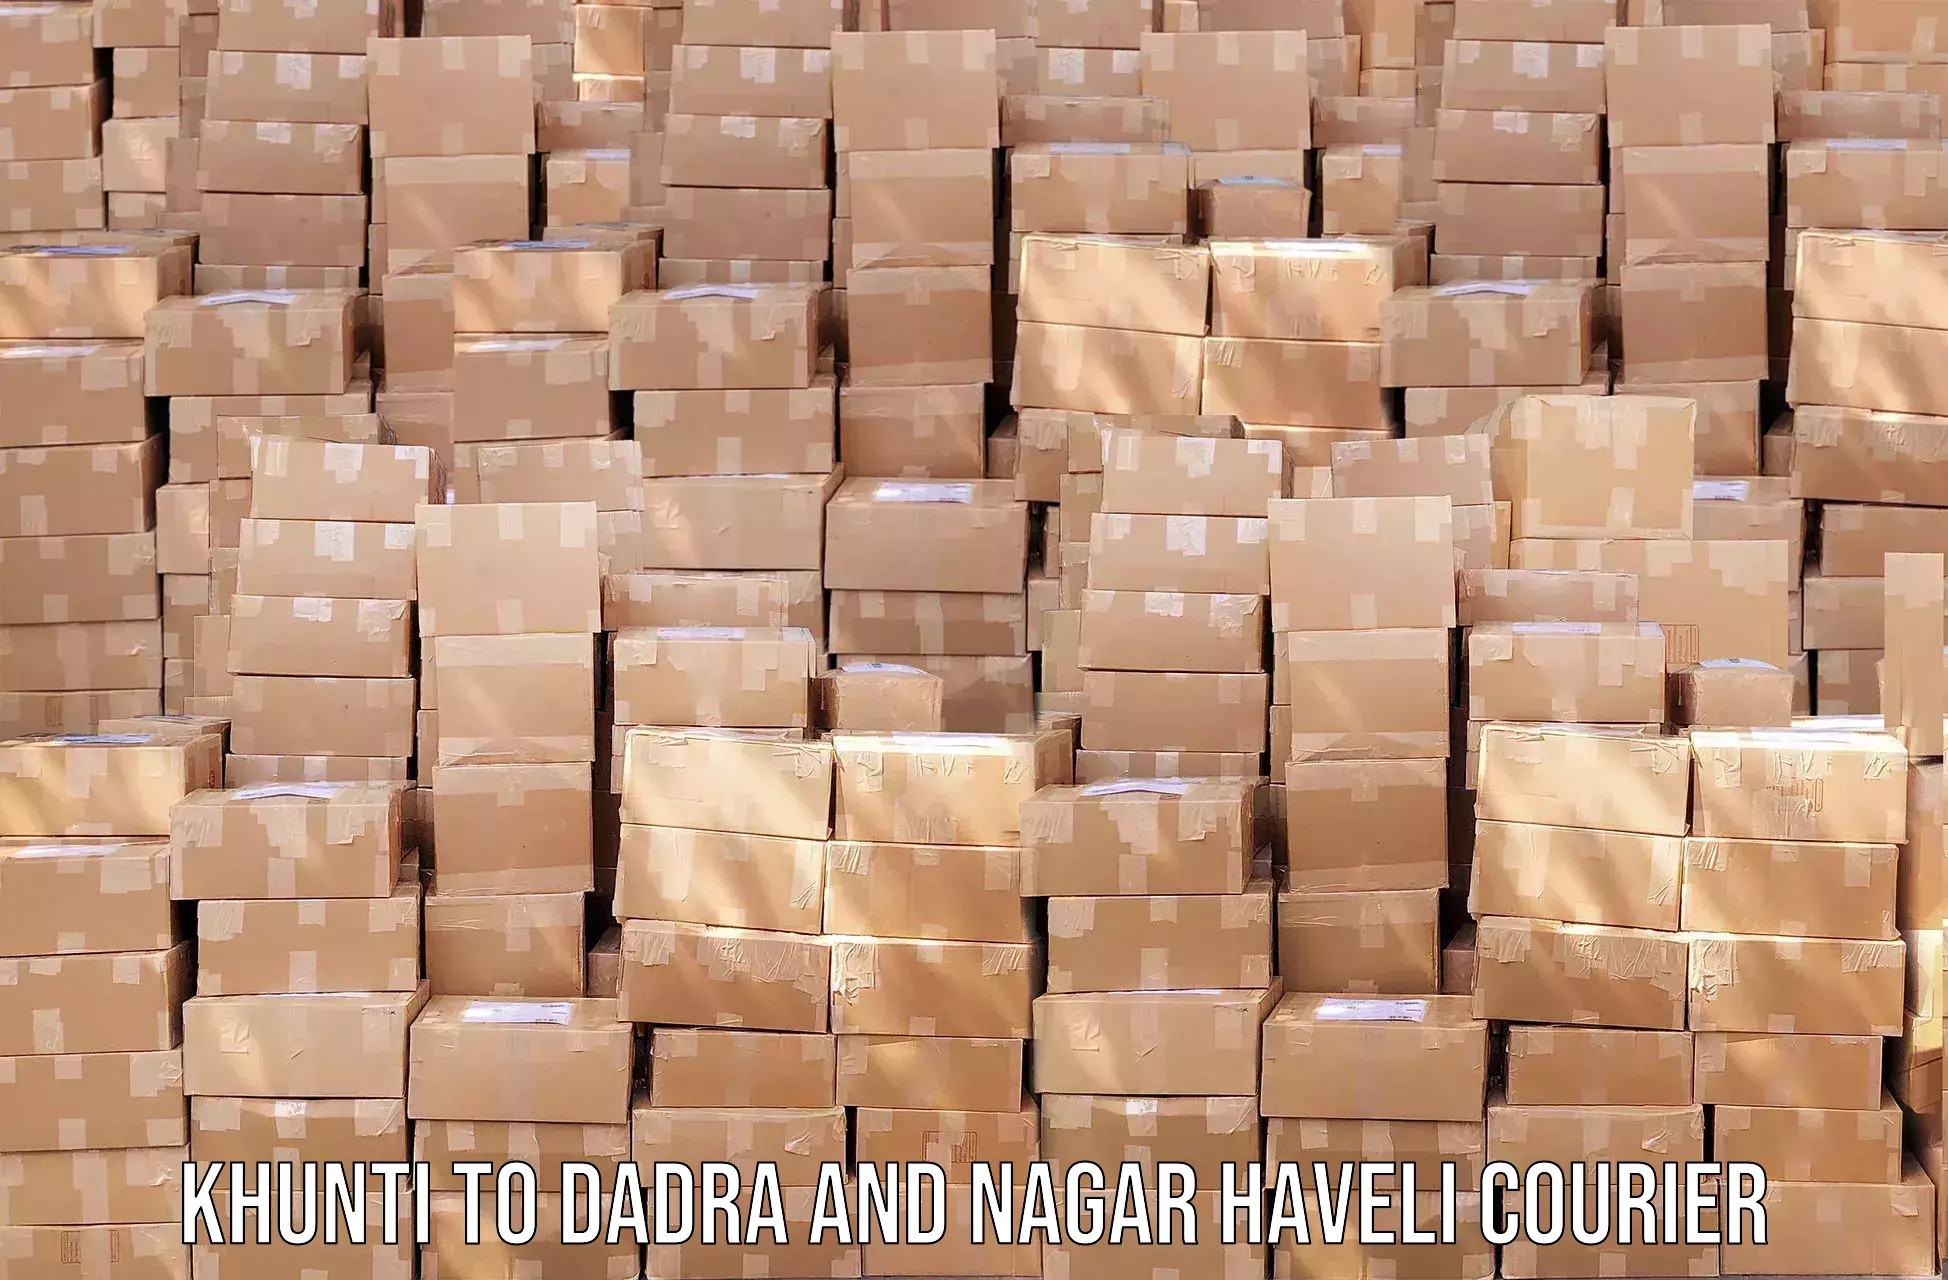 Reliable parcel services Khunti to Dadra and Nagar Haveli